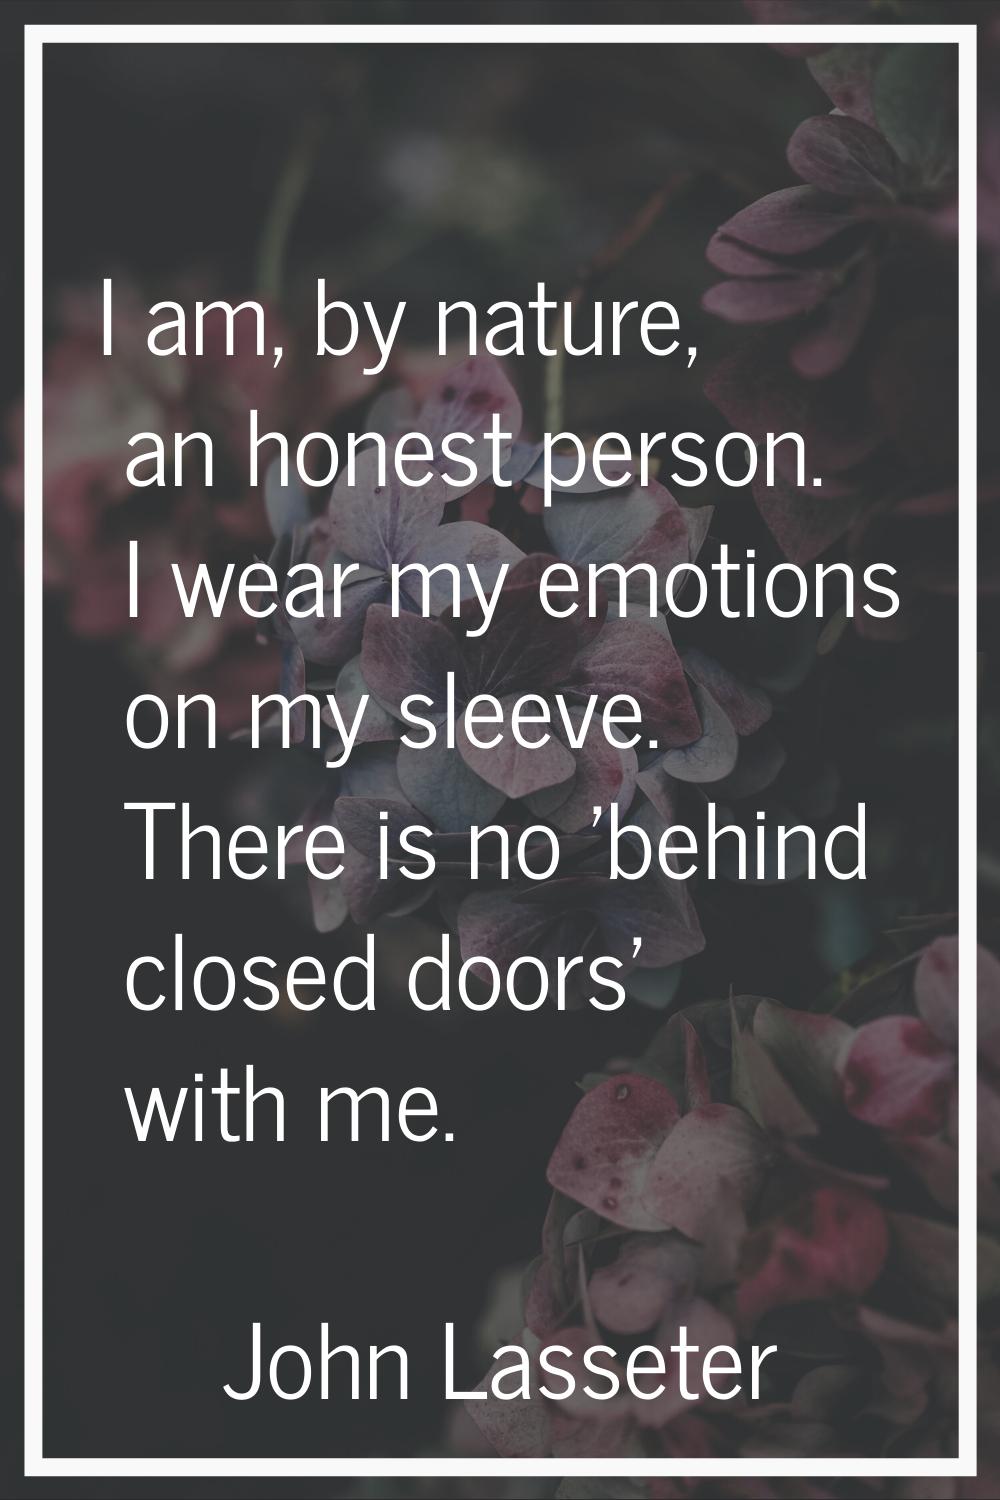 I am, by nature, an honest person. I wear my emotions on my sleeve. There is no 'behind closed door